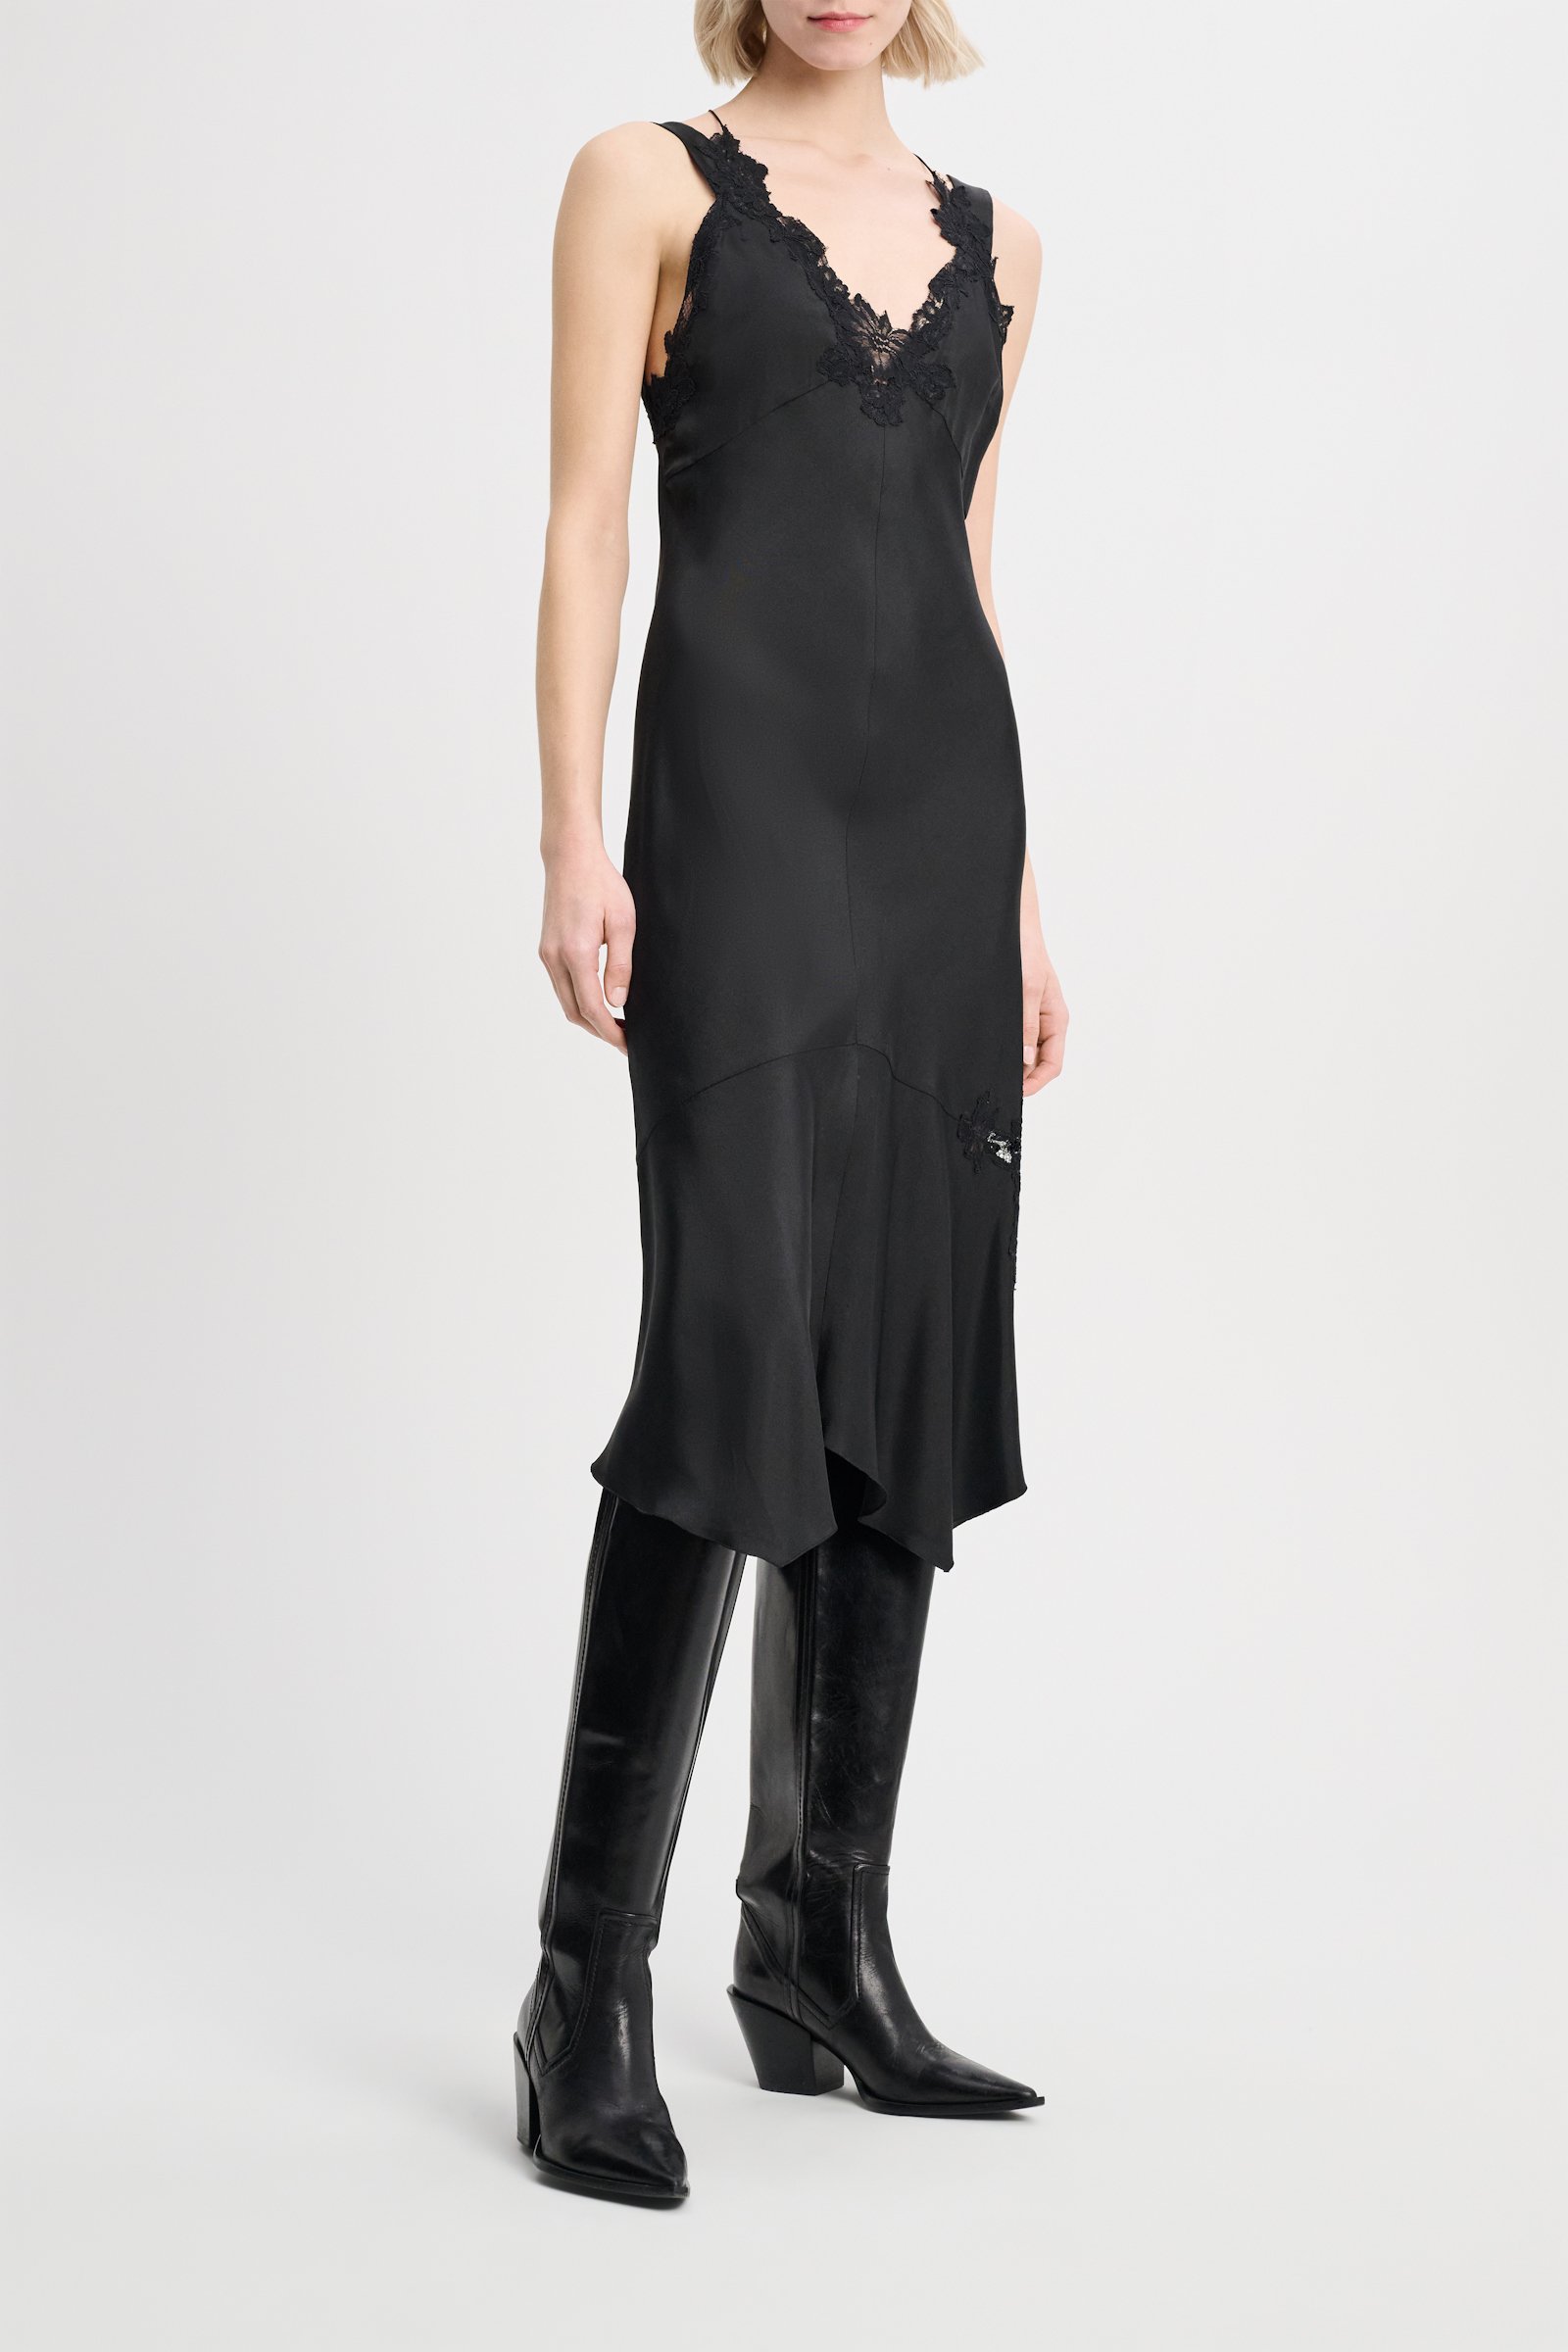 Dorothee Schumacher Silk twill lingerie-style dress with details in lace pure black